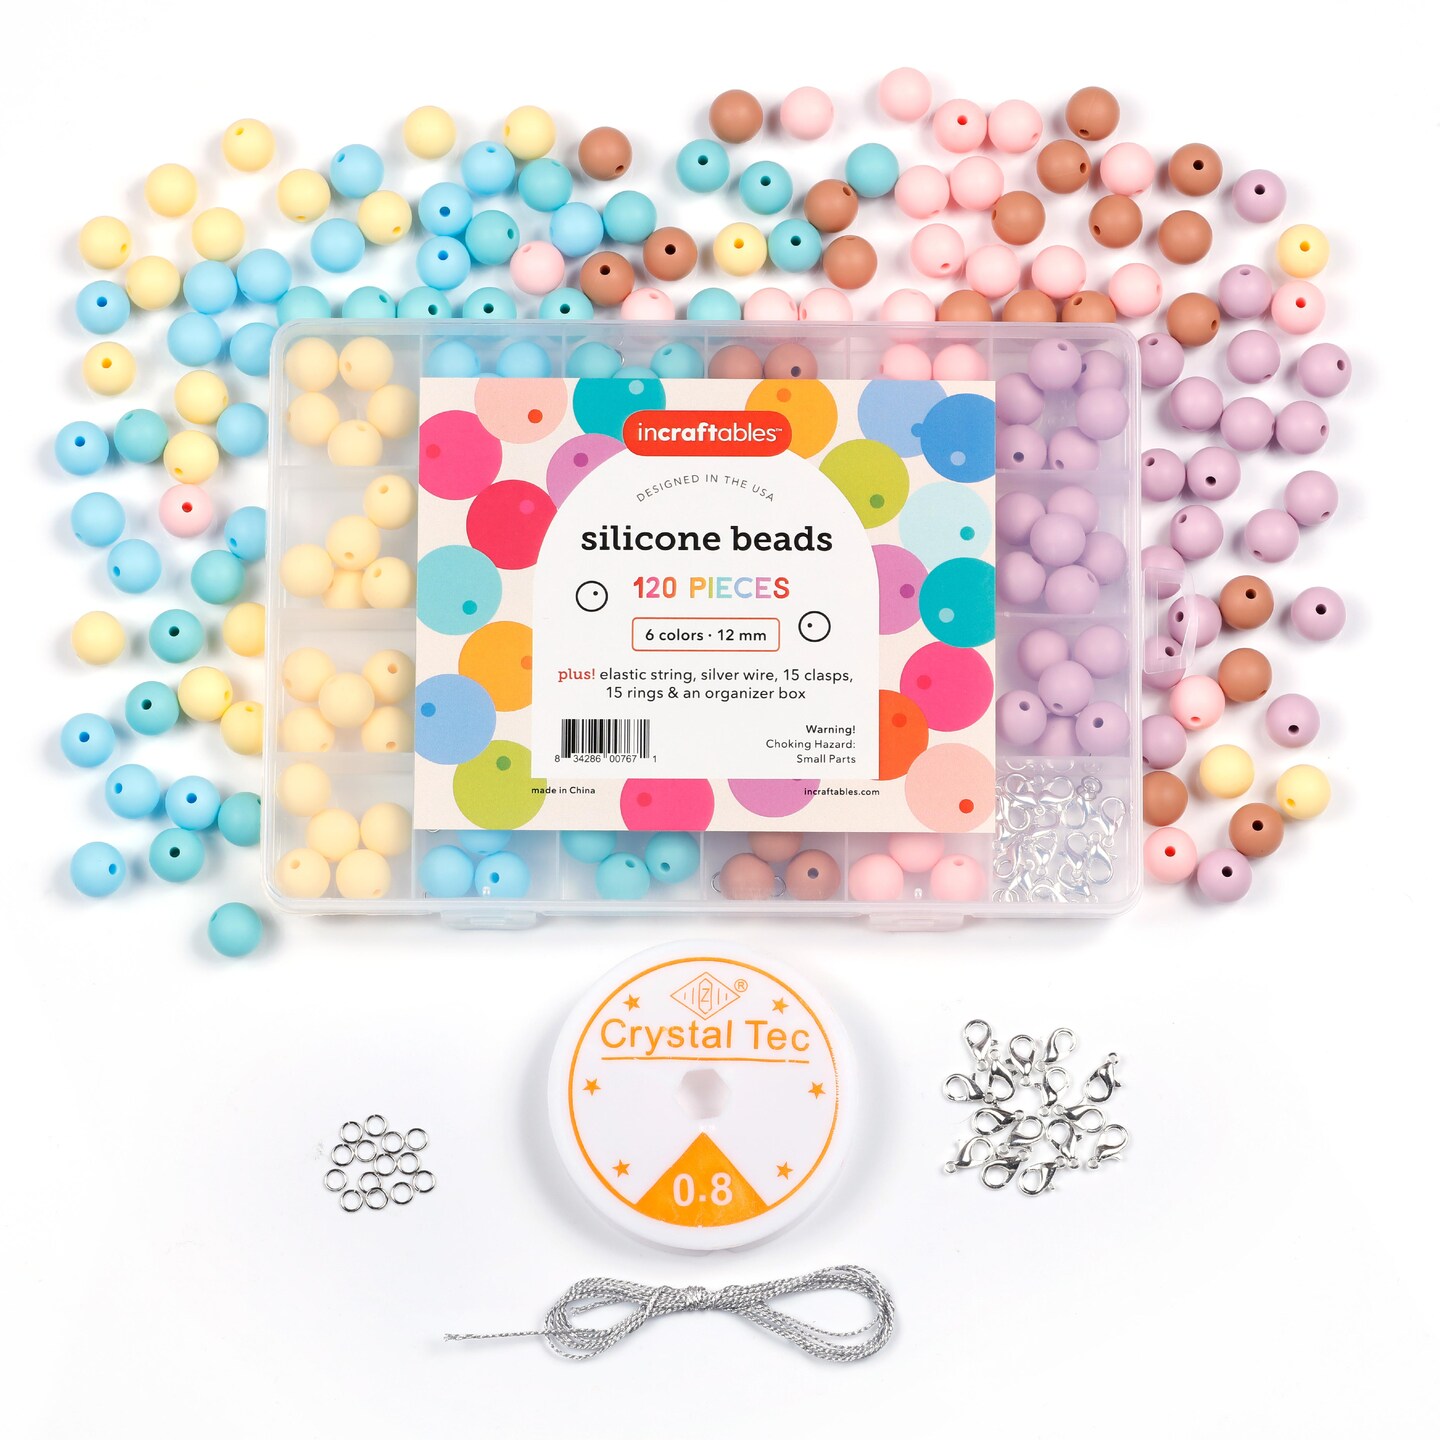 Incraftables Silicone Beads for Keychain making 120pcs Kit (6 Colors). Bulk Rubber beads for Kids &#x26; Adults. 12mm Silicone Beads for Jewelry Making with Elastic String, Silver Wire, Clasps &#x26; Organizer